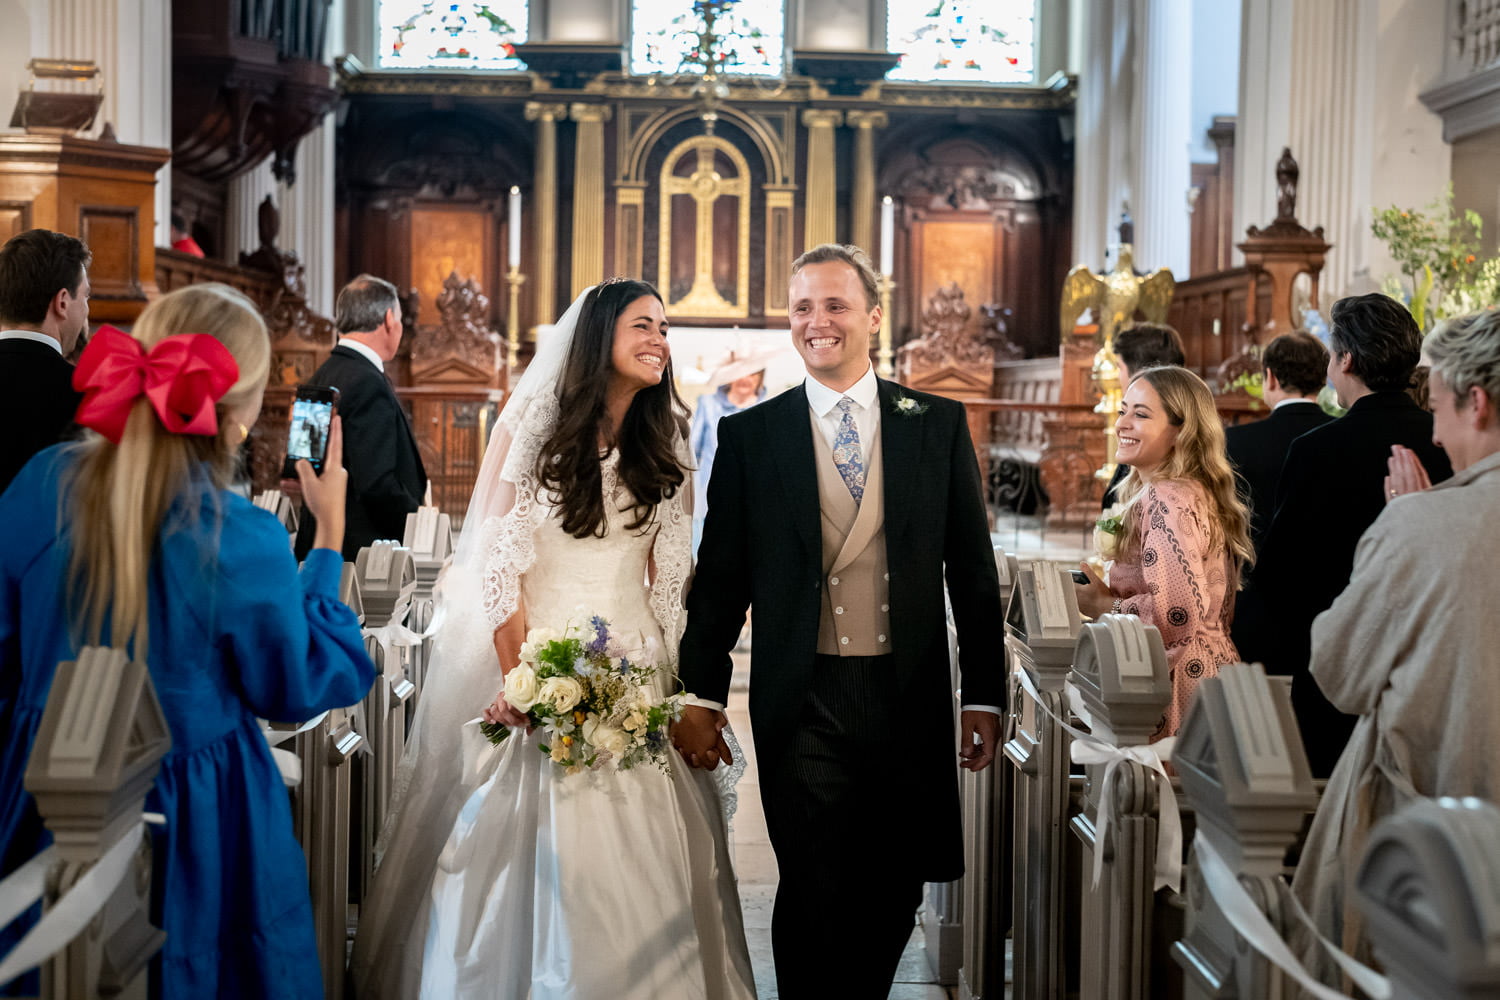 Bride and groom photographed in London church